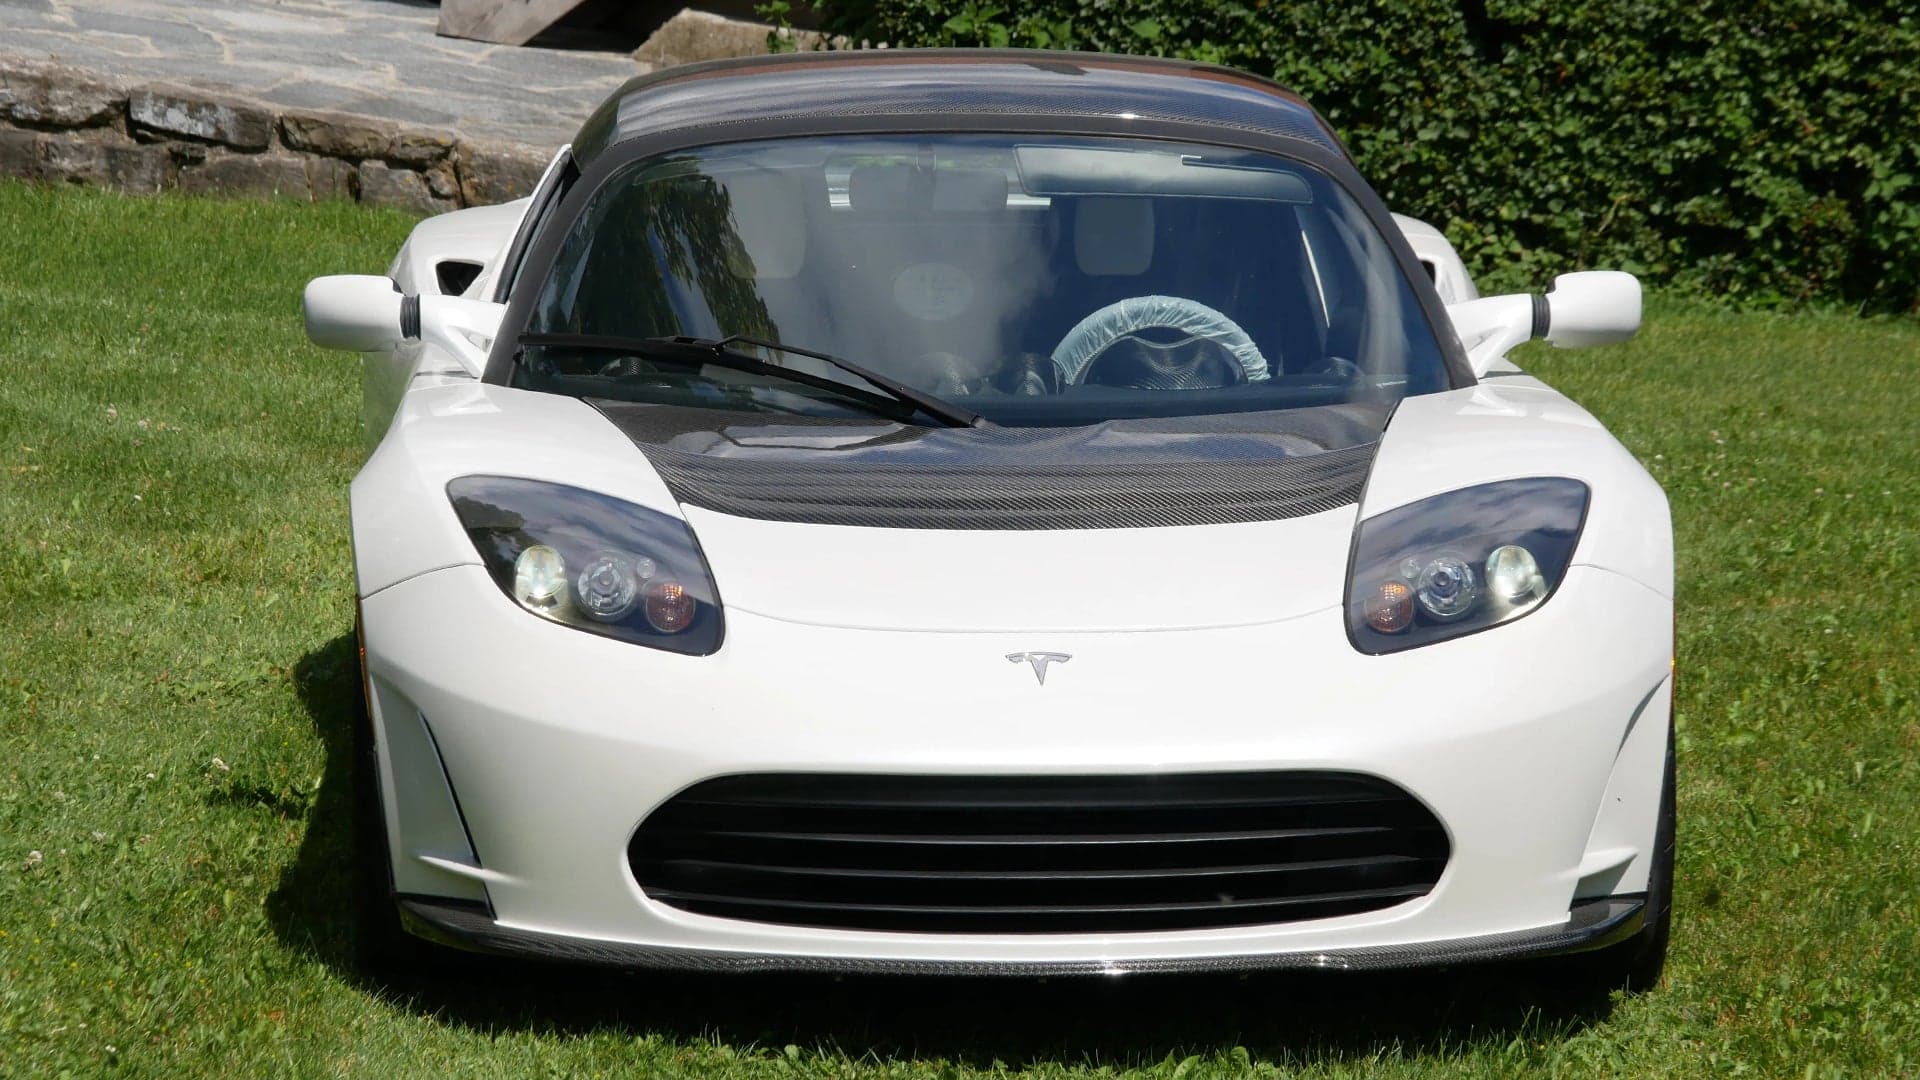 You’ll Need $1.5M to Own the Last Tesla Roadster Ever Built